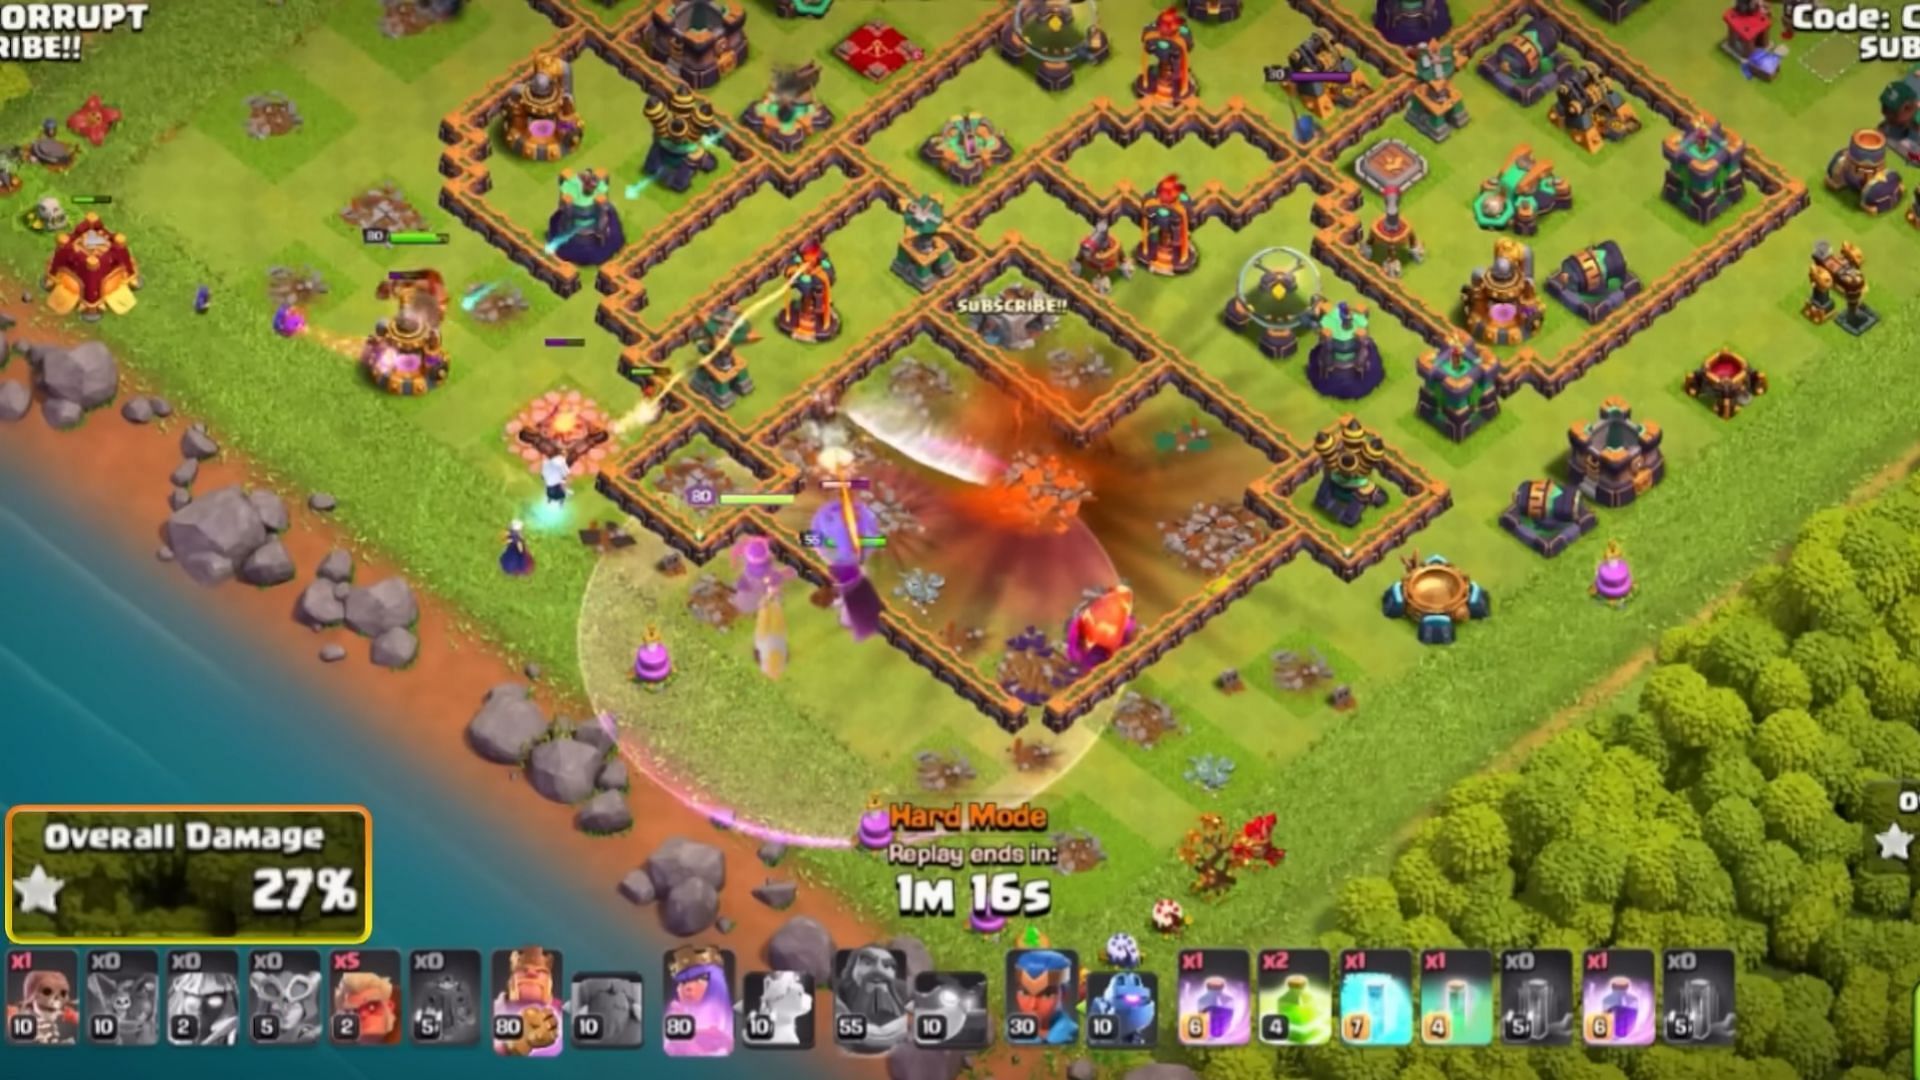 Fireball Super Witch Druid Hybrid attacking strategy (Image via SuperCell)